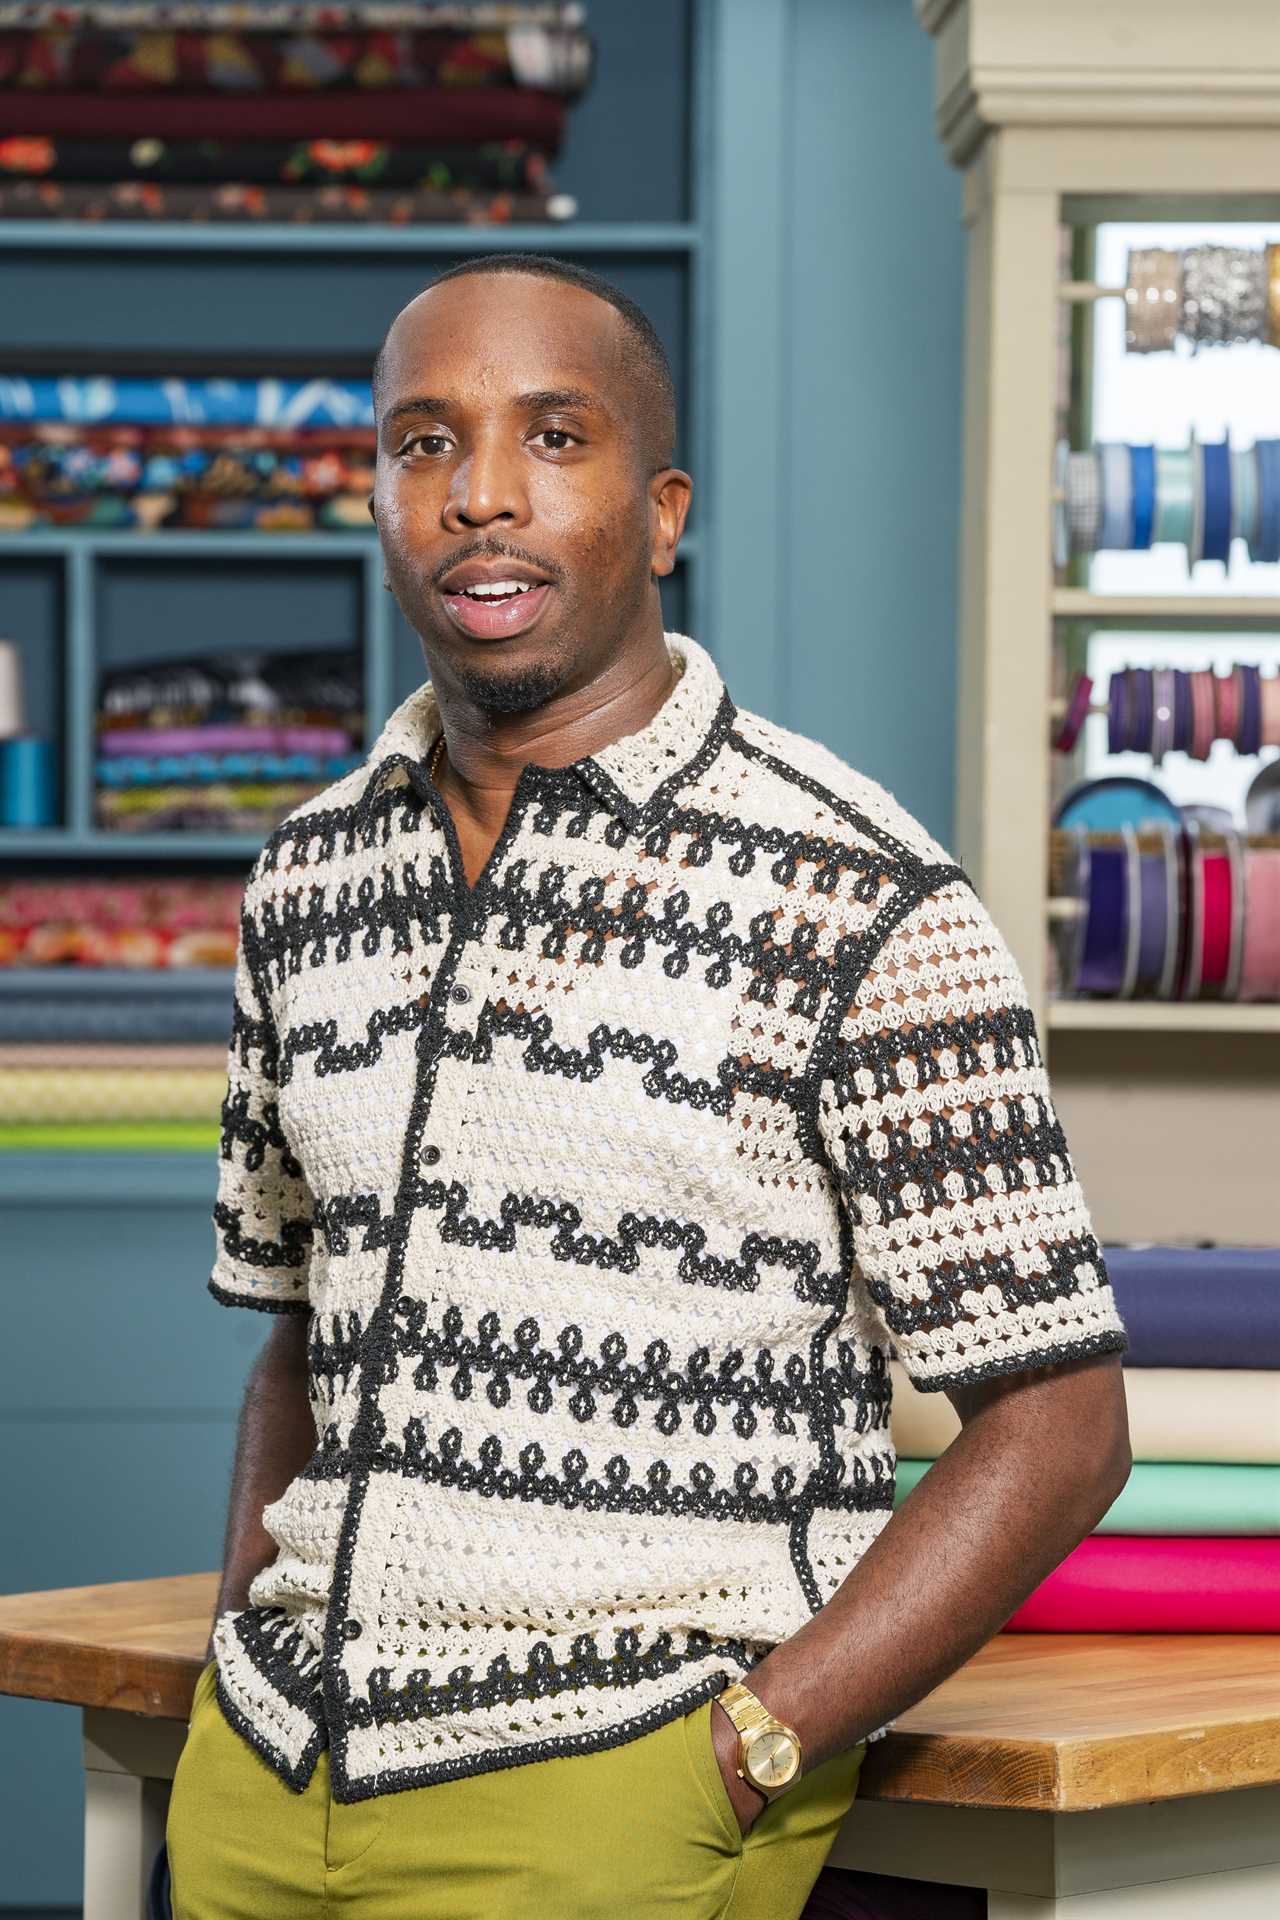 Behind the Scenes of Sewing Bee with Kiell Smith-Bynoe